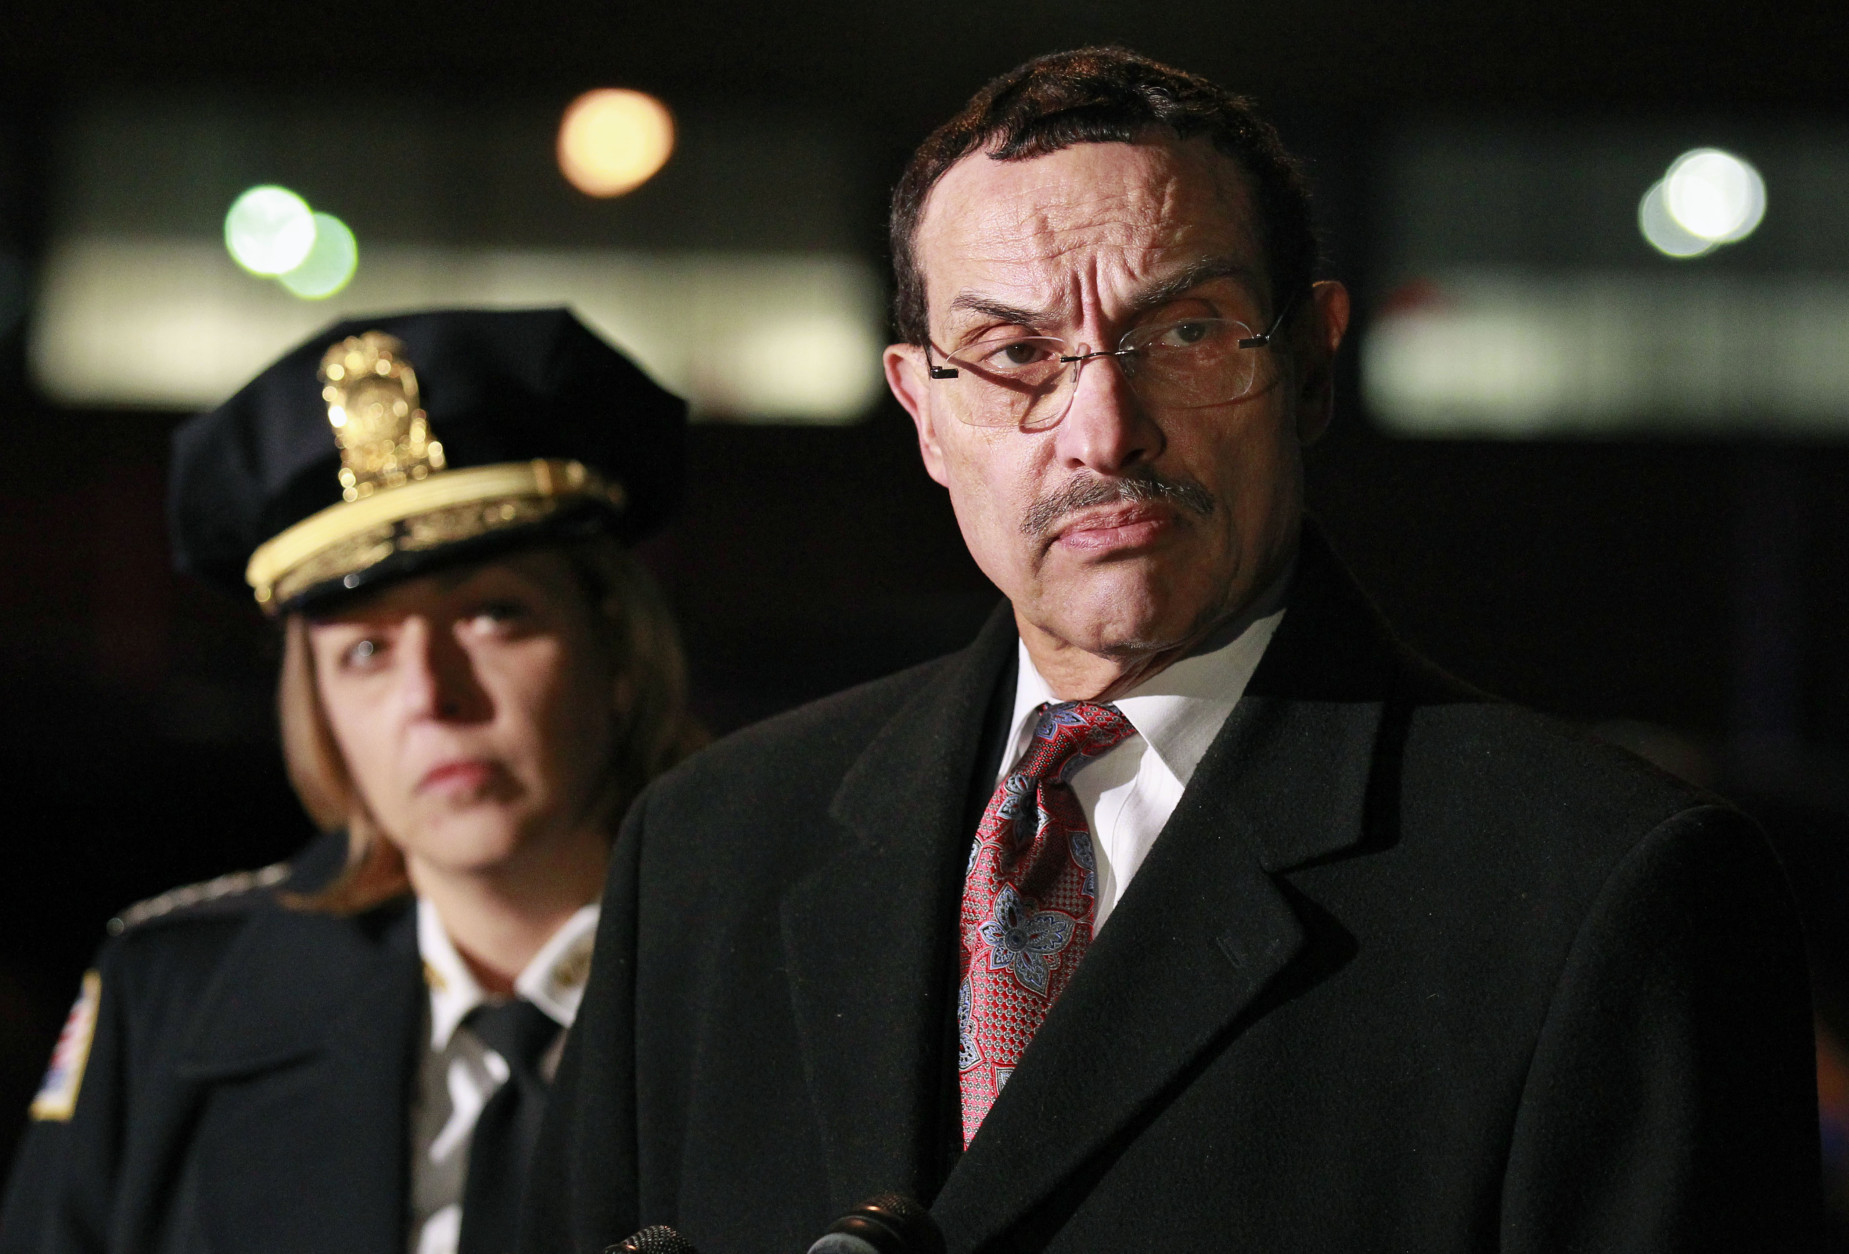 Washington Mayor Vincent Gray, right, and Chief of Police Cathy Lanier, talk with the media near a postal sorting facility in Washington, Friday, Jan. 7, 2011. A package ignited at the facility, a day after fiery packages sent to Maryland's governor and transportation secretary burned the fingers of workers who opened them.(AP Photo/Alex Brandon)